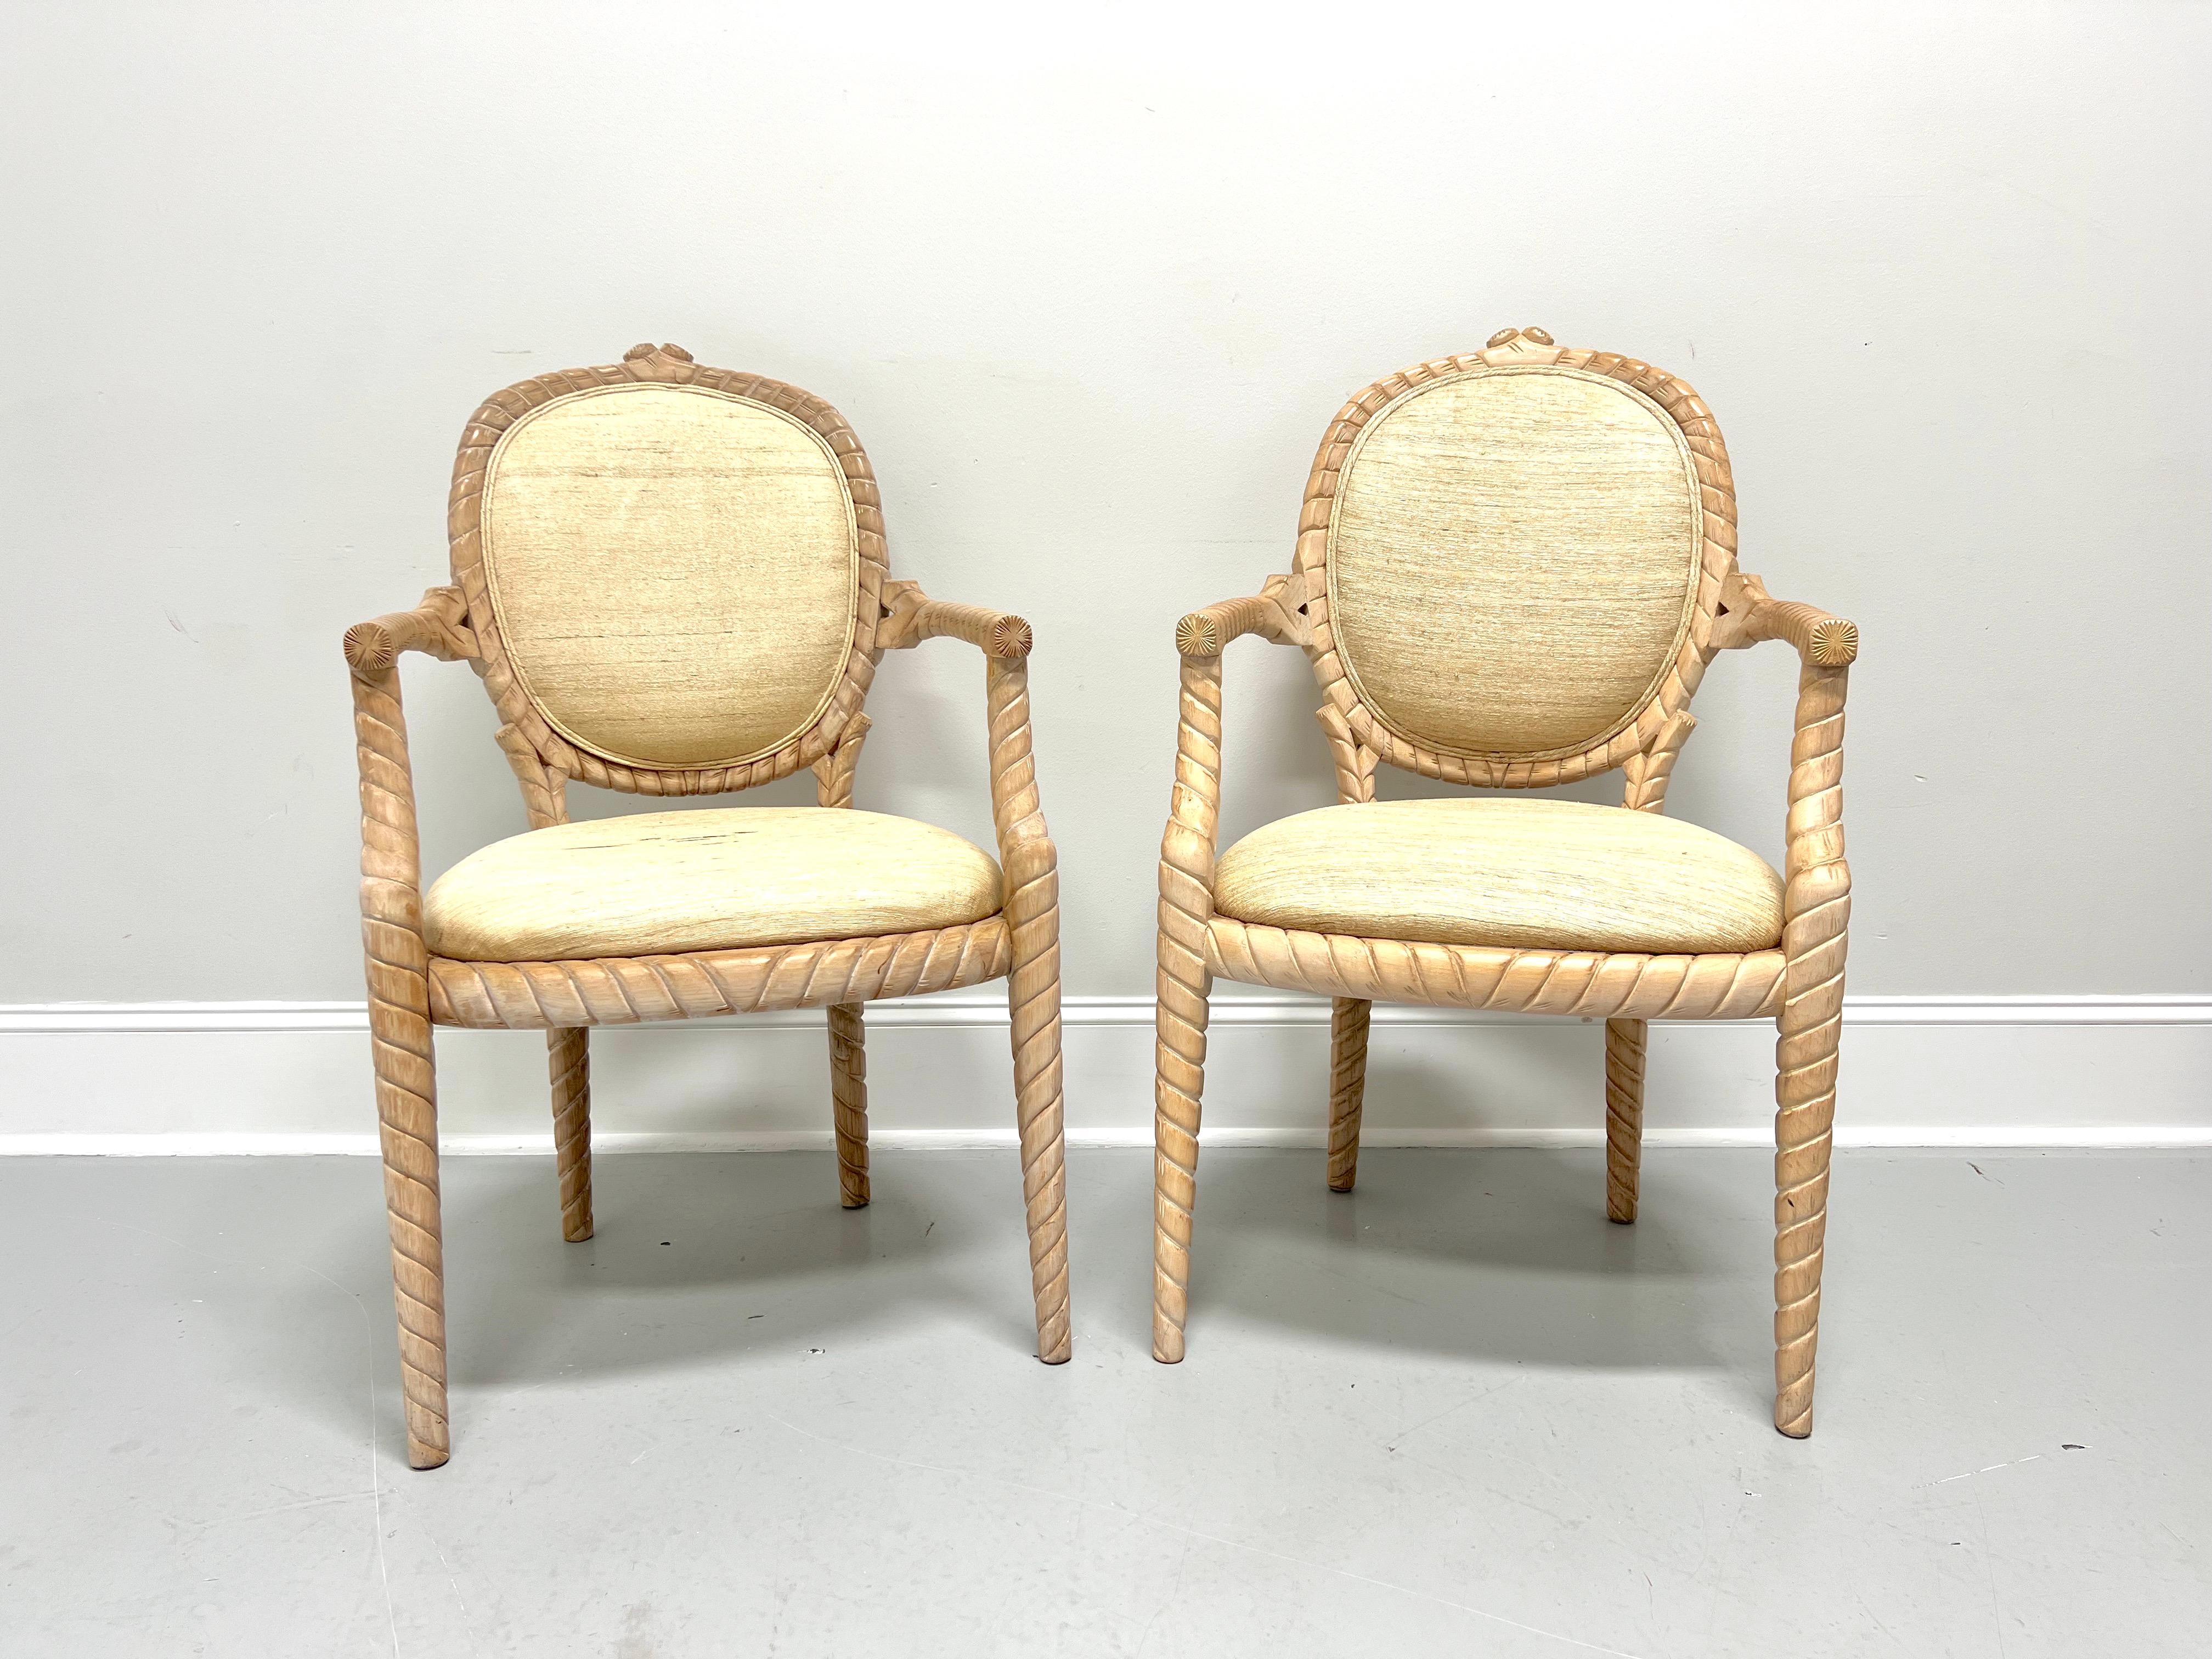 1980's Carved Whitewashed Wood Boho Rope Twist Dining Armchairs - Pair For Sale 5